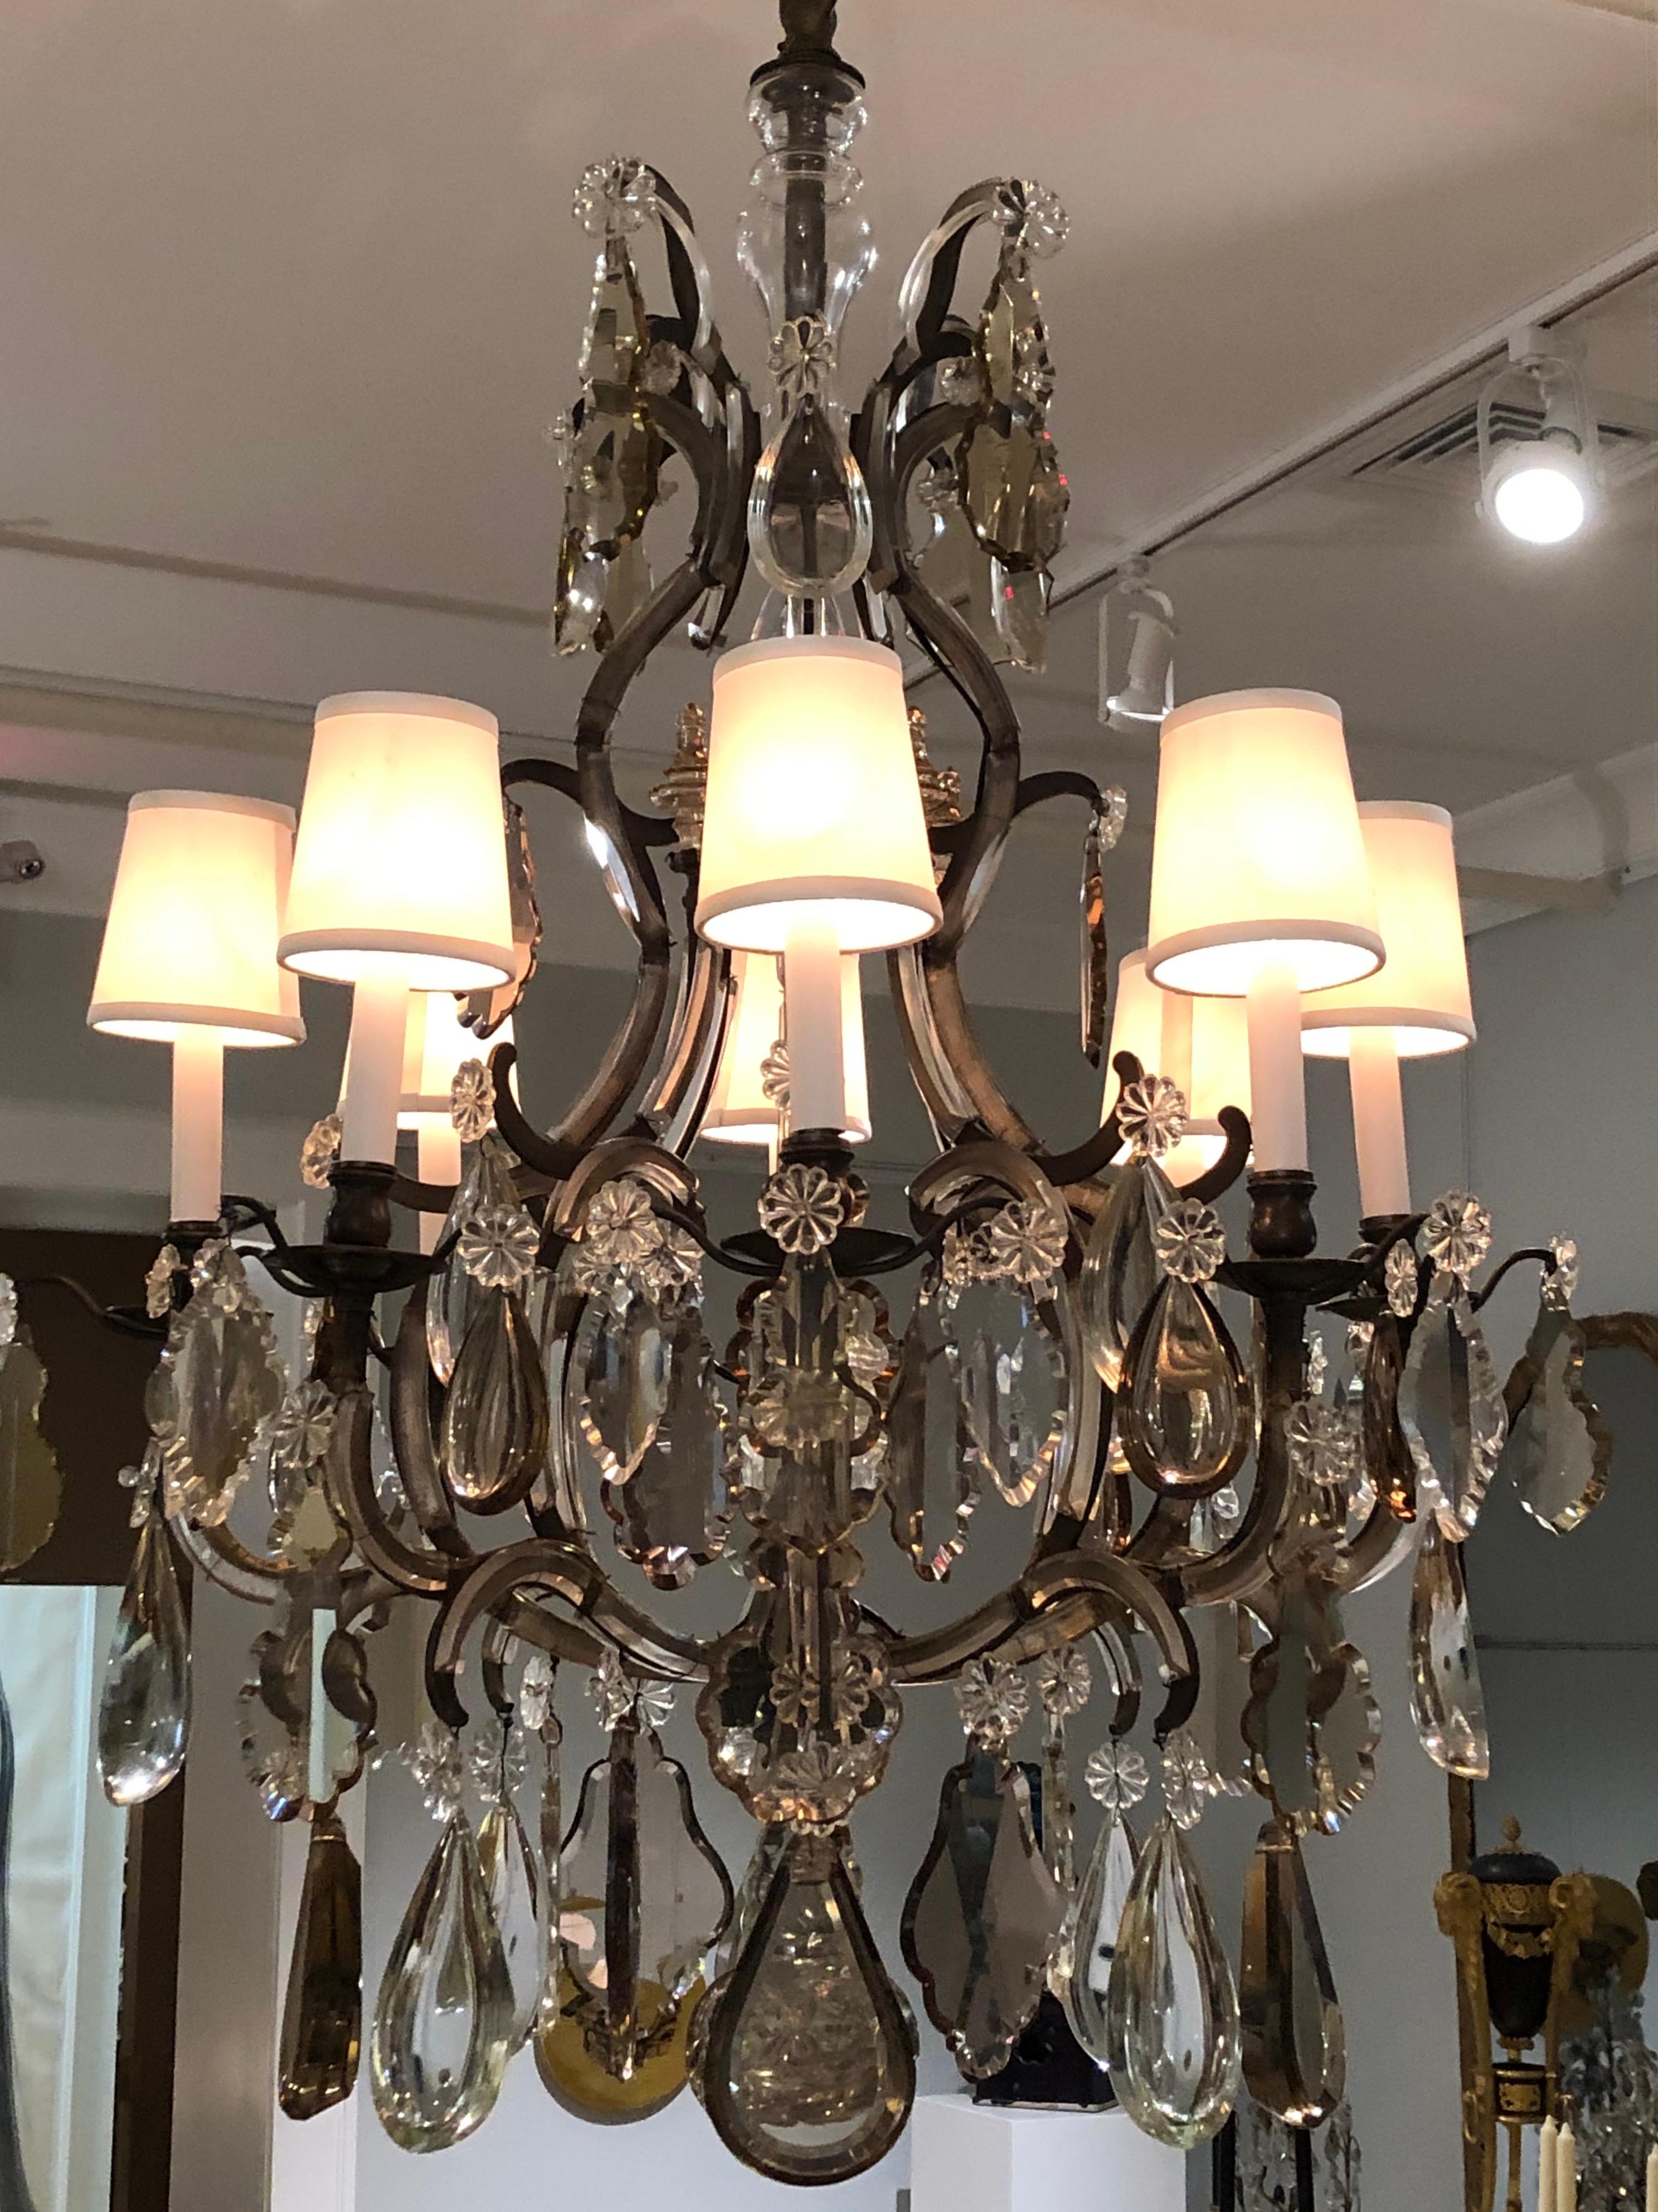 This 1930s French chandelier adapts an Ancien Regime form to Cafe Society taste. The arms are3 trimmed with cut-glass arabesques, the frame is steel rather than ormolu, and its festooned with prisms cut from thick slabs of clear and bronze